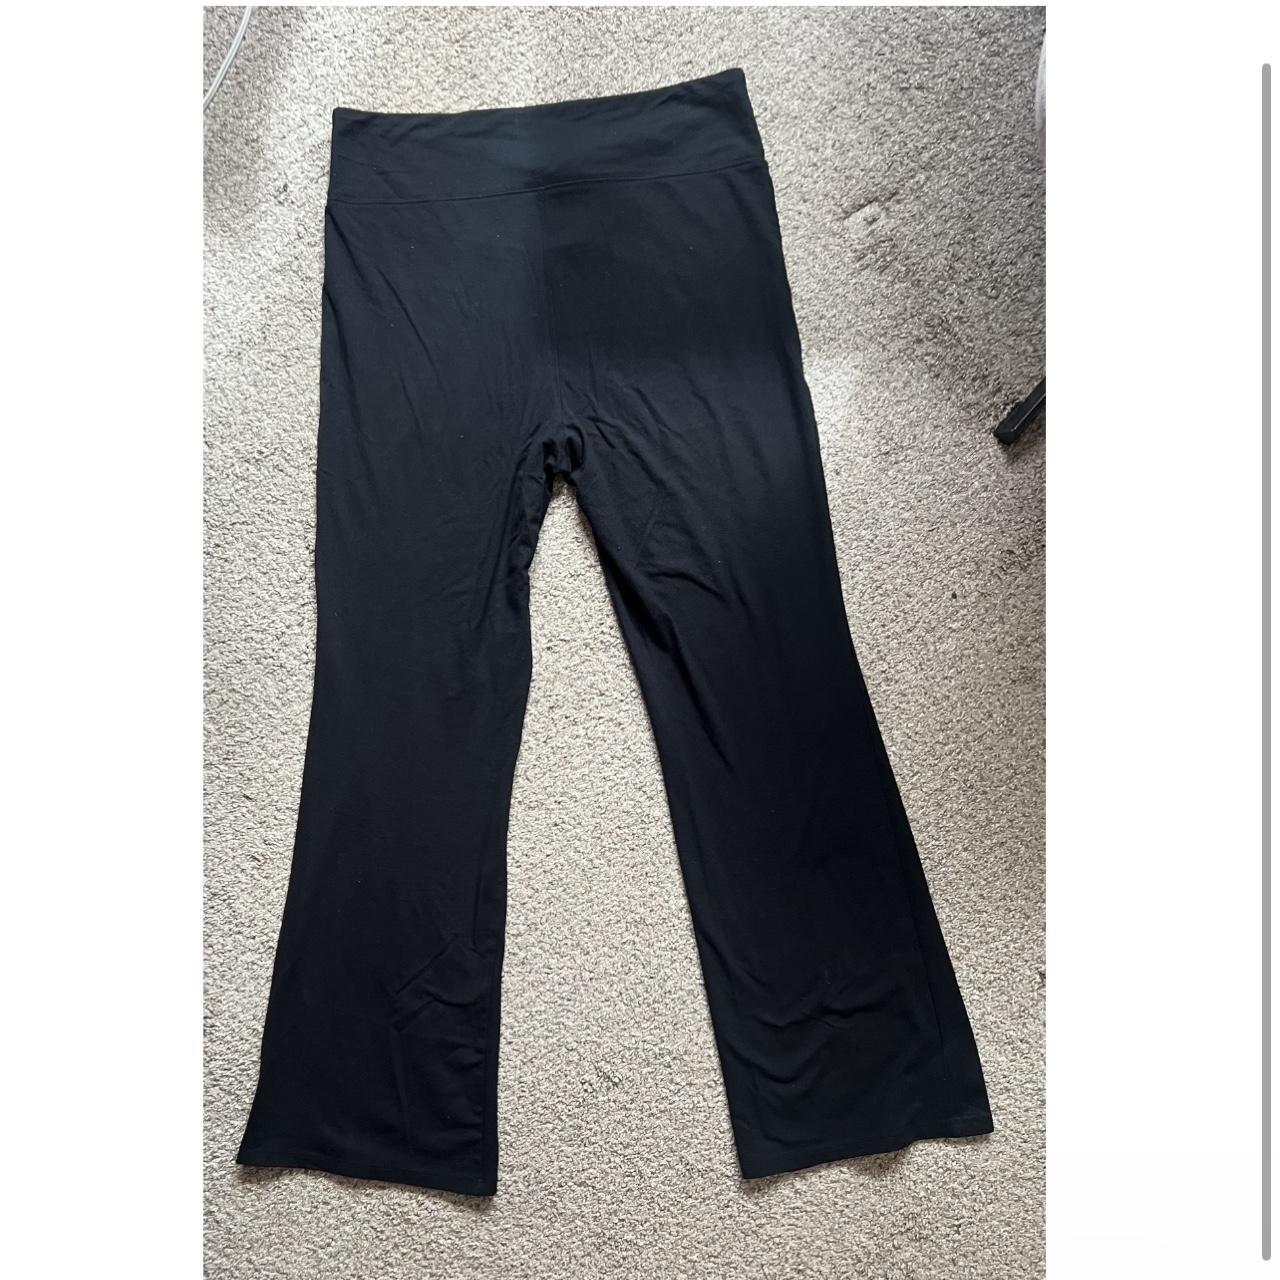 Wild Fable High Waisted Leggings Faux Leather Black - Depop